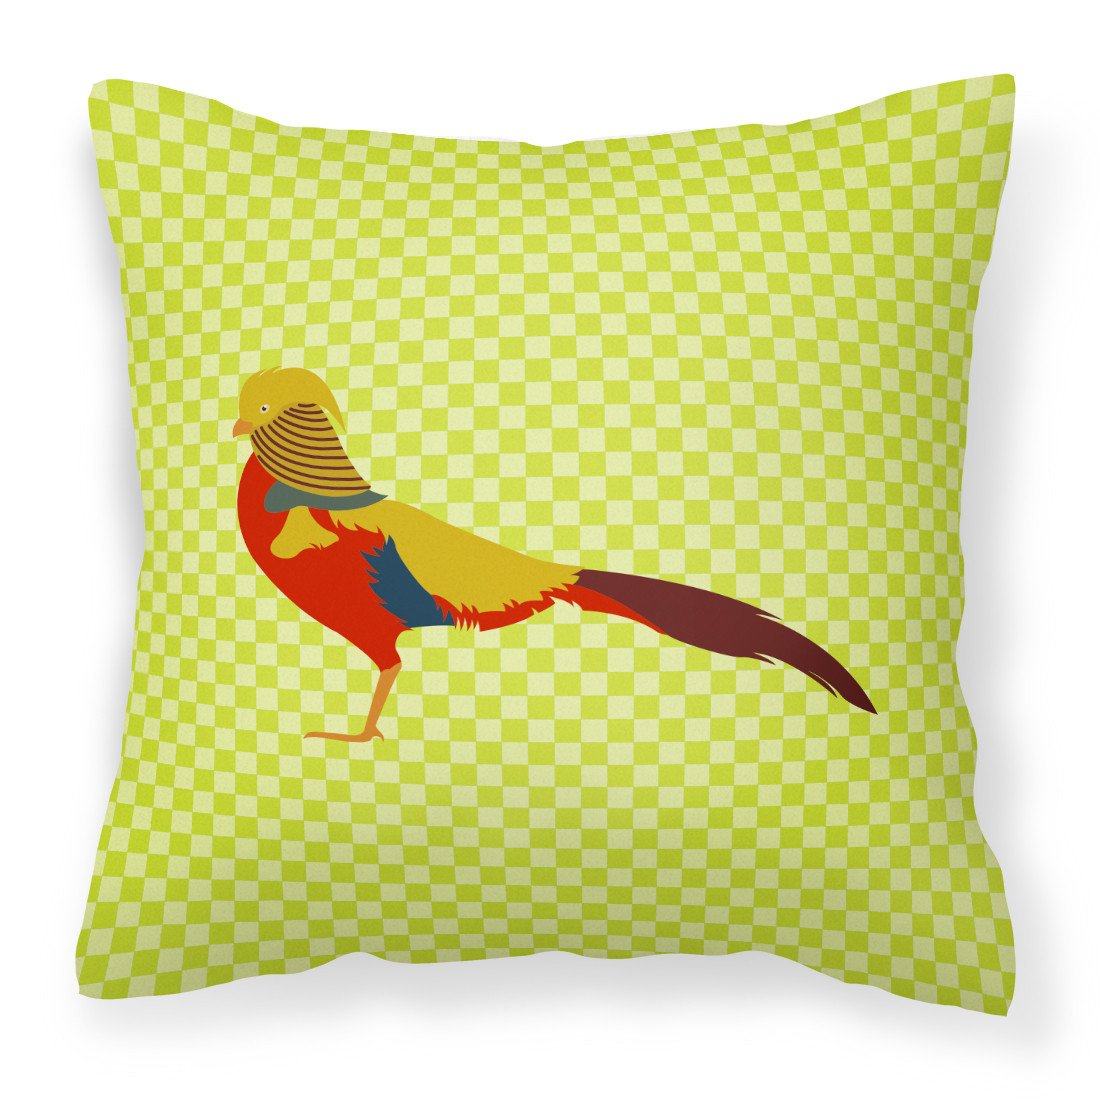 Golden or Chinese Pheasant Green Fabric Decorative Pillow BB7754PW1818 by Caroline's Treasures